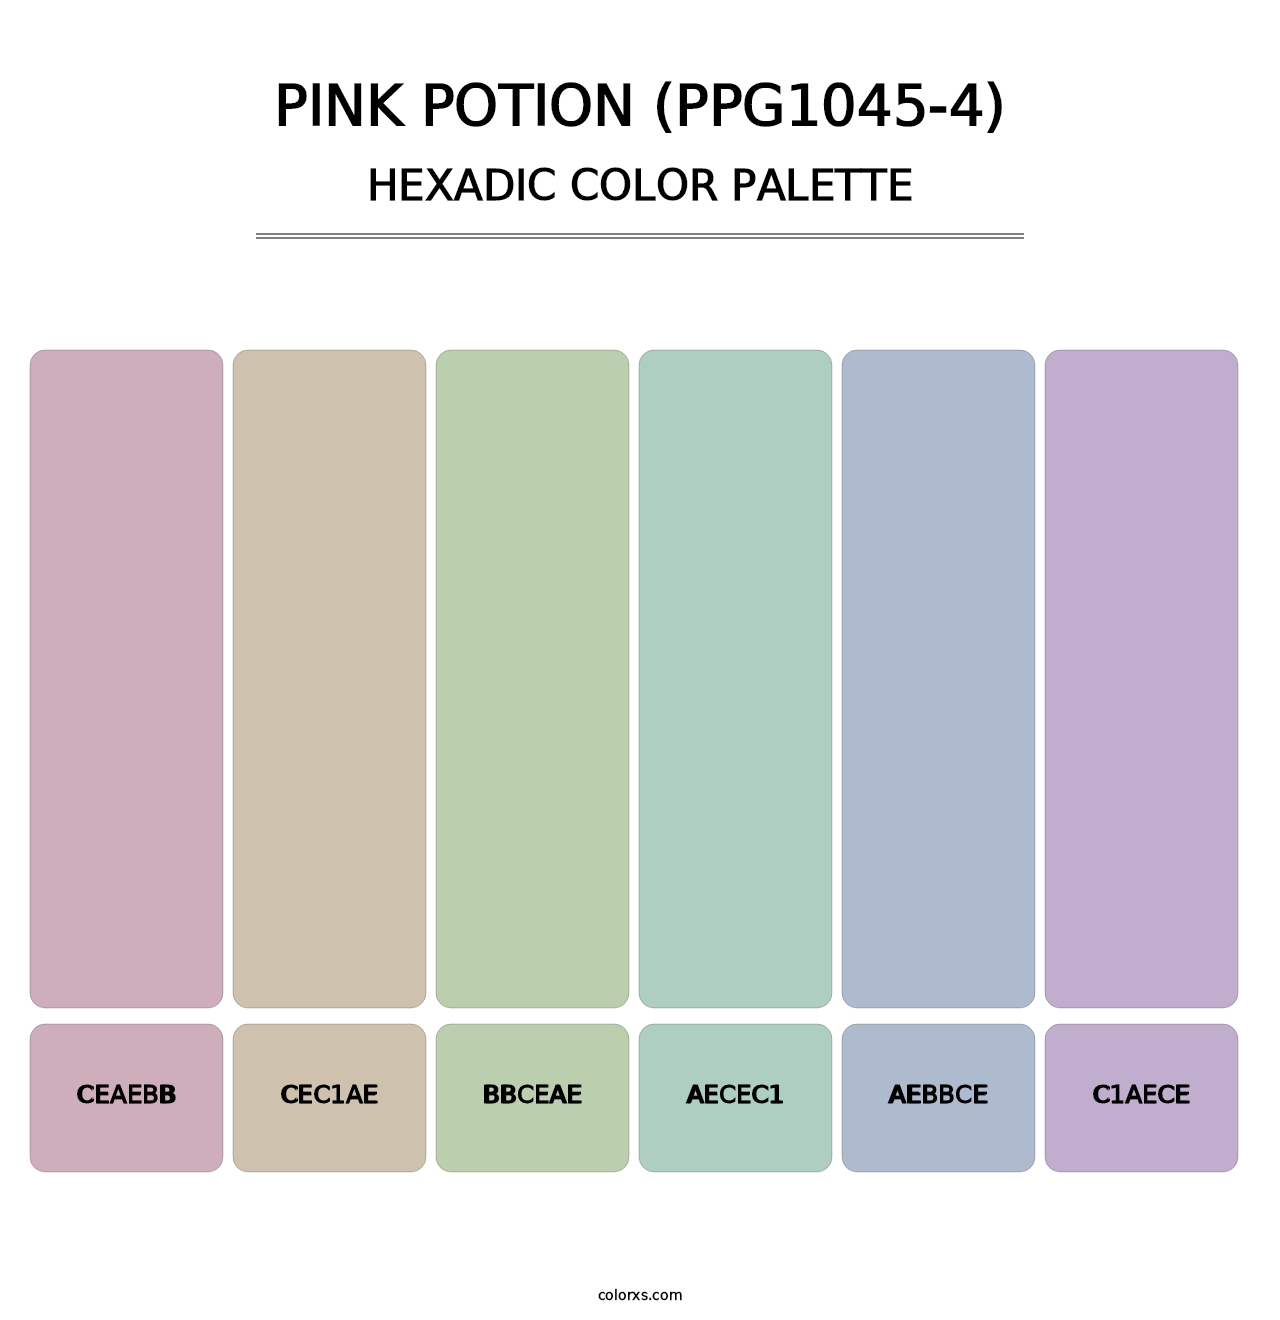 Pink Potion (PPG1045-4) - Hexadic Color Palette